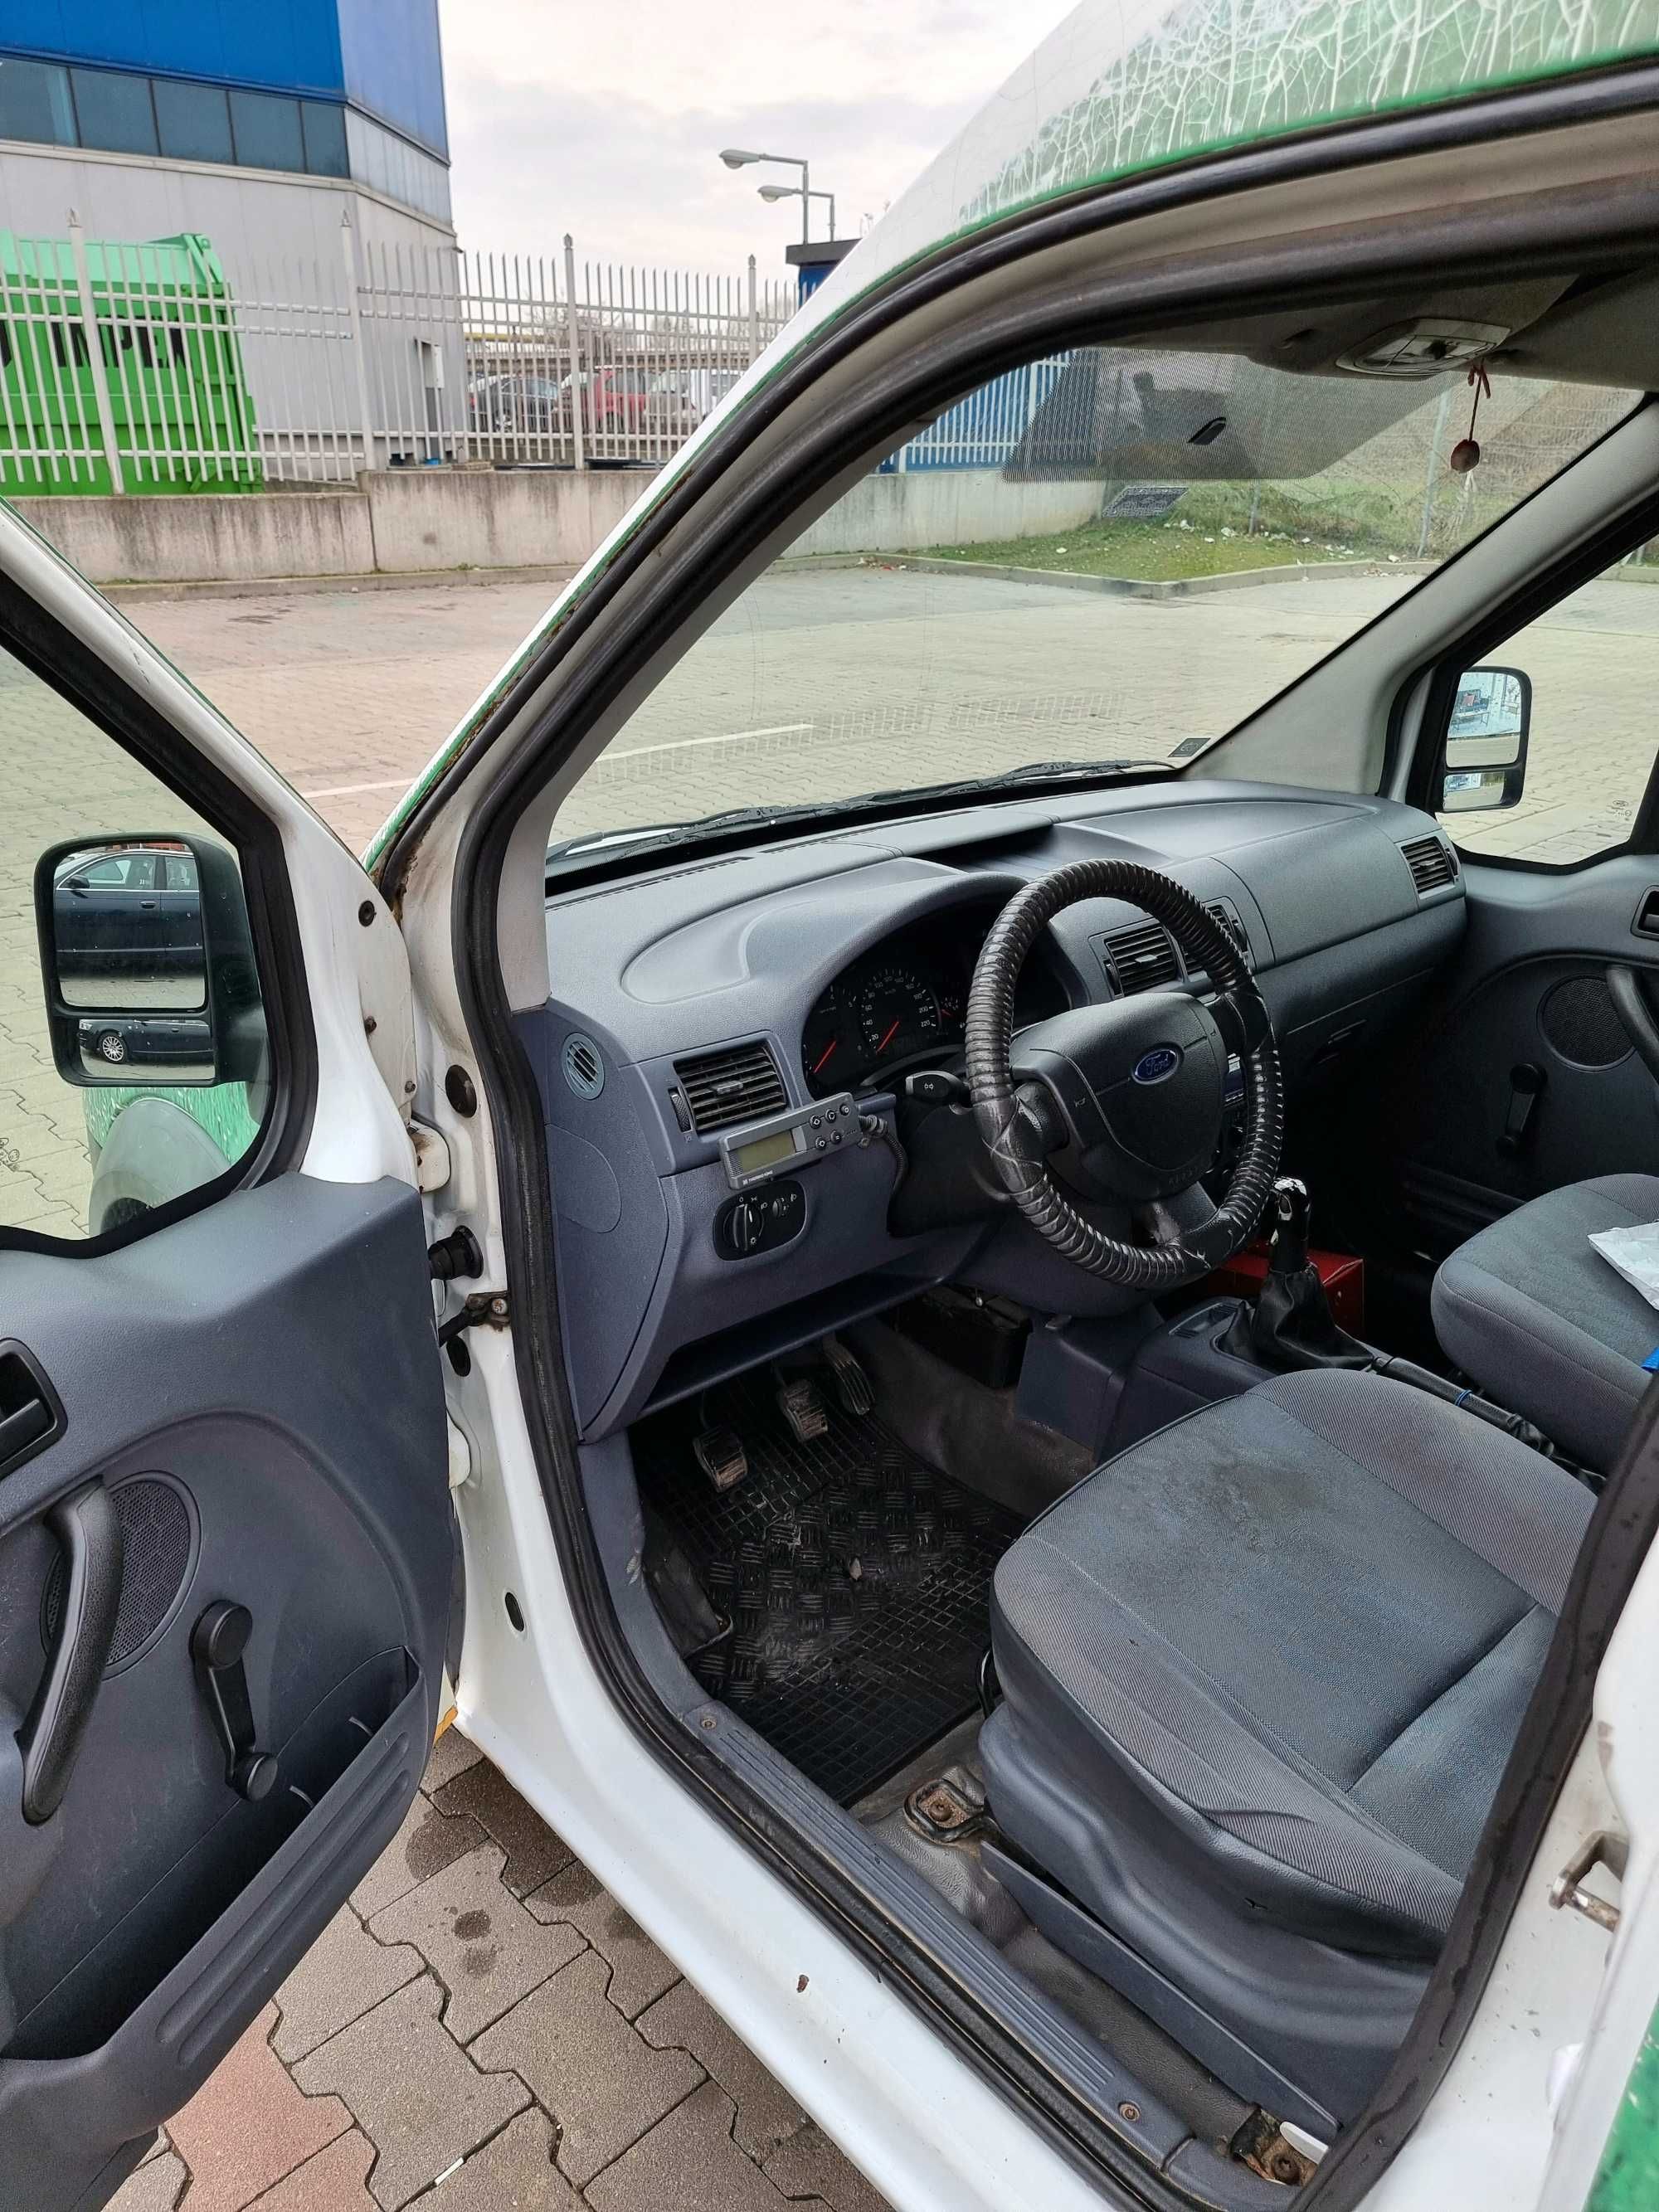 Ford Connect 1.8 TDCI Хладилен